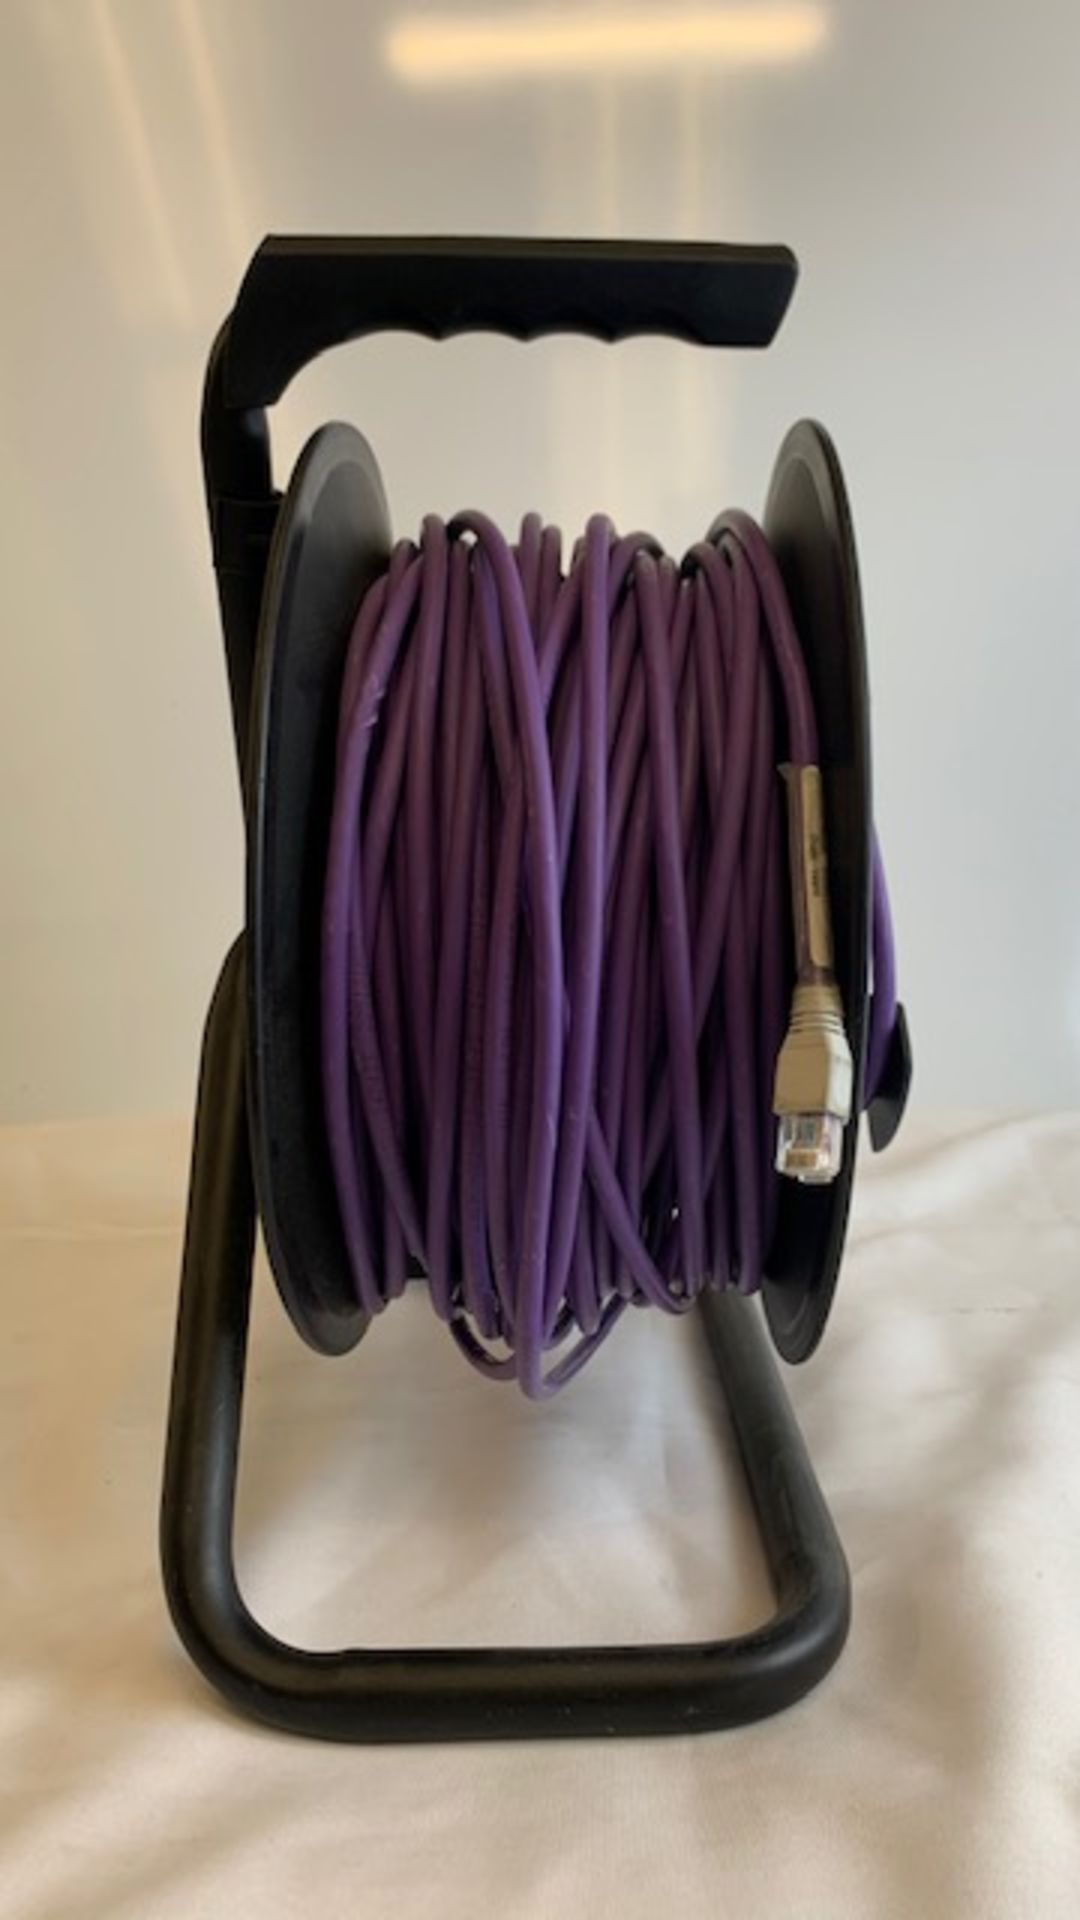 1 x 60 Meter Cat 6 cable on a drum - Ref: 1113 - CL581 - Location: Altrincham WA14 - Image 3 of 3